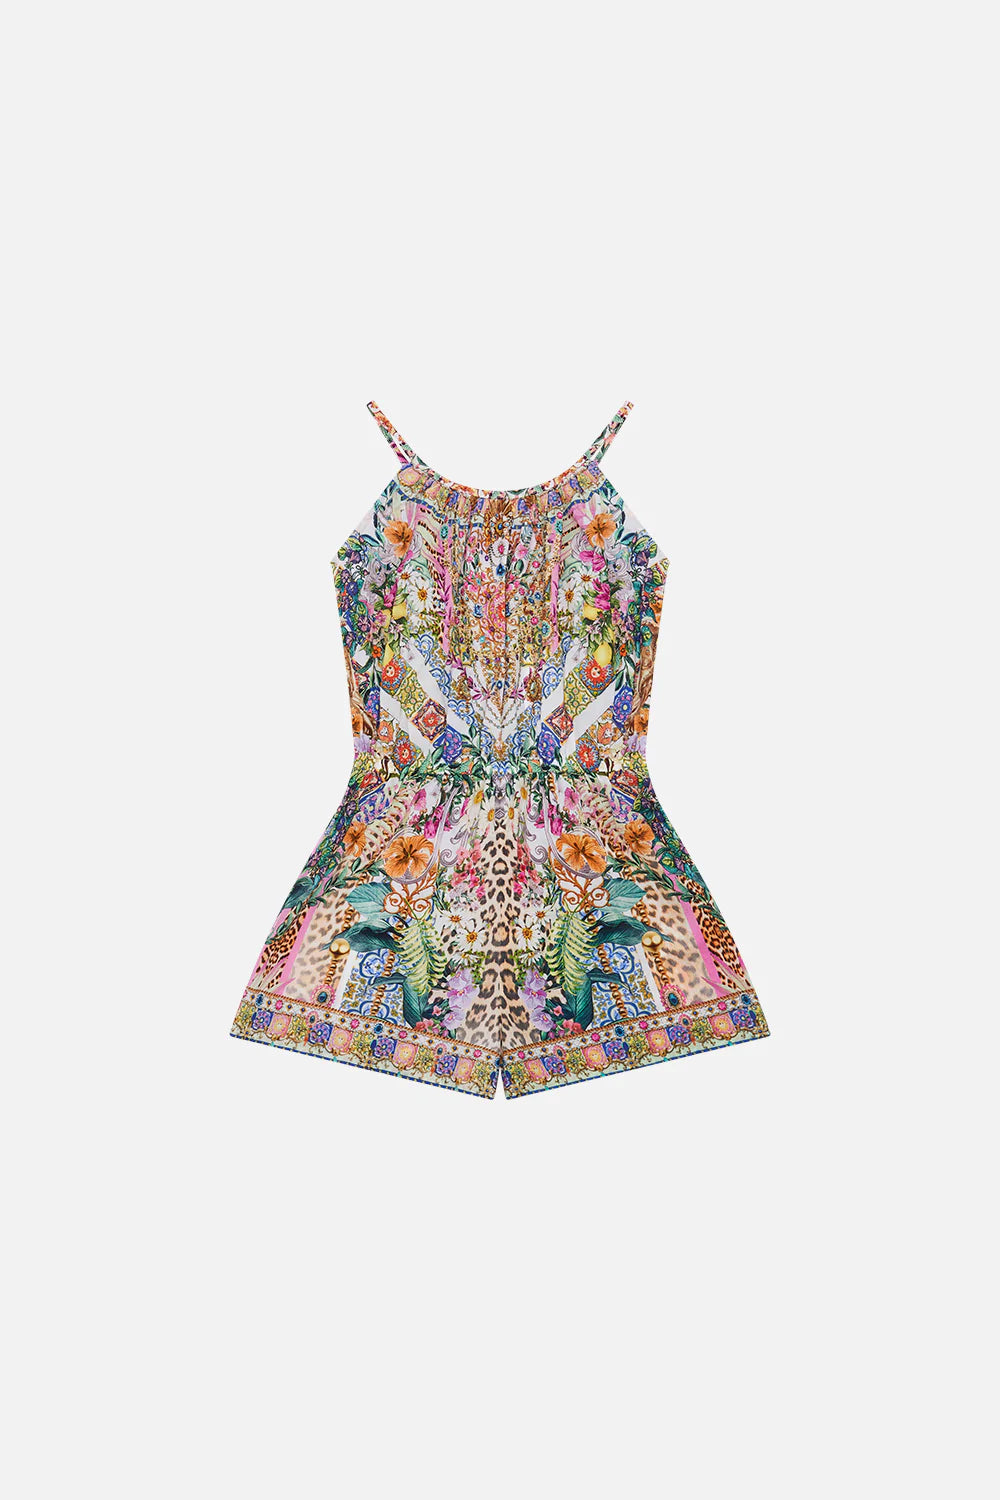 Camilla Flowers Of Neptune Kids Shoestring Strap Playsuit